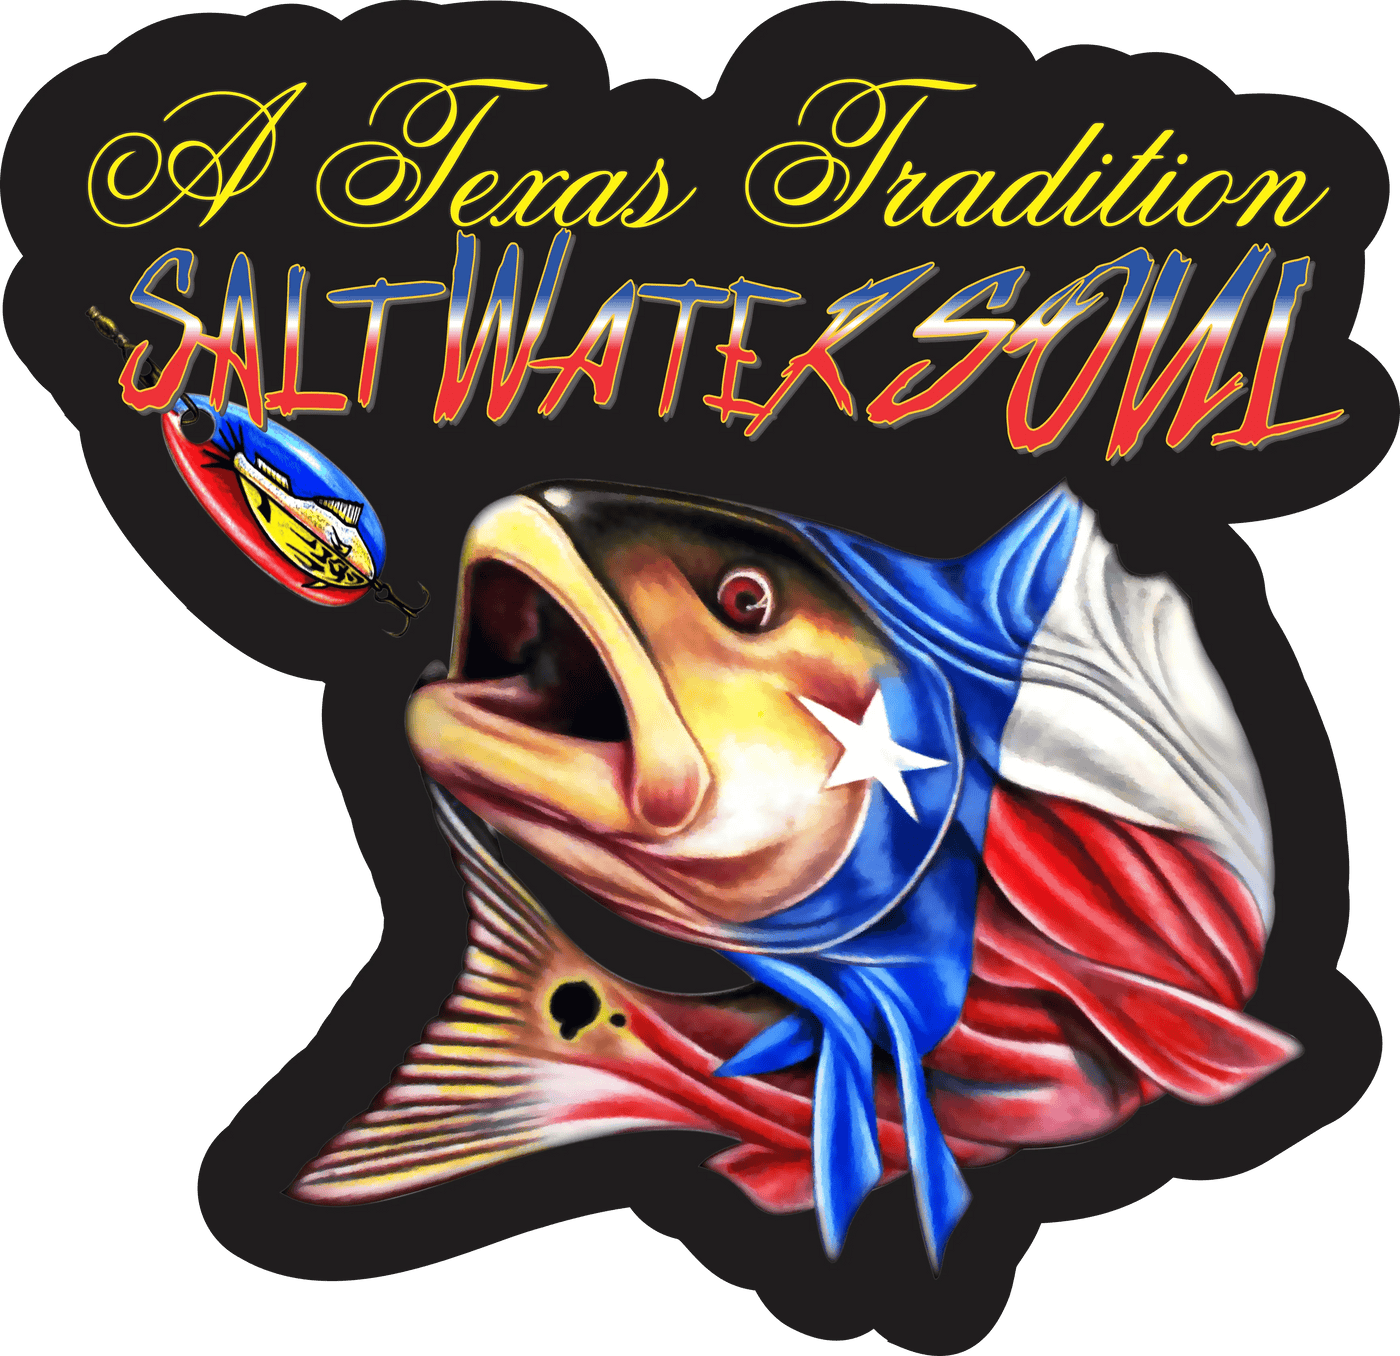 Saltwater Soul - Decal Bumper Stickers Saltwater Soul Texas Tradition 